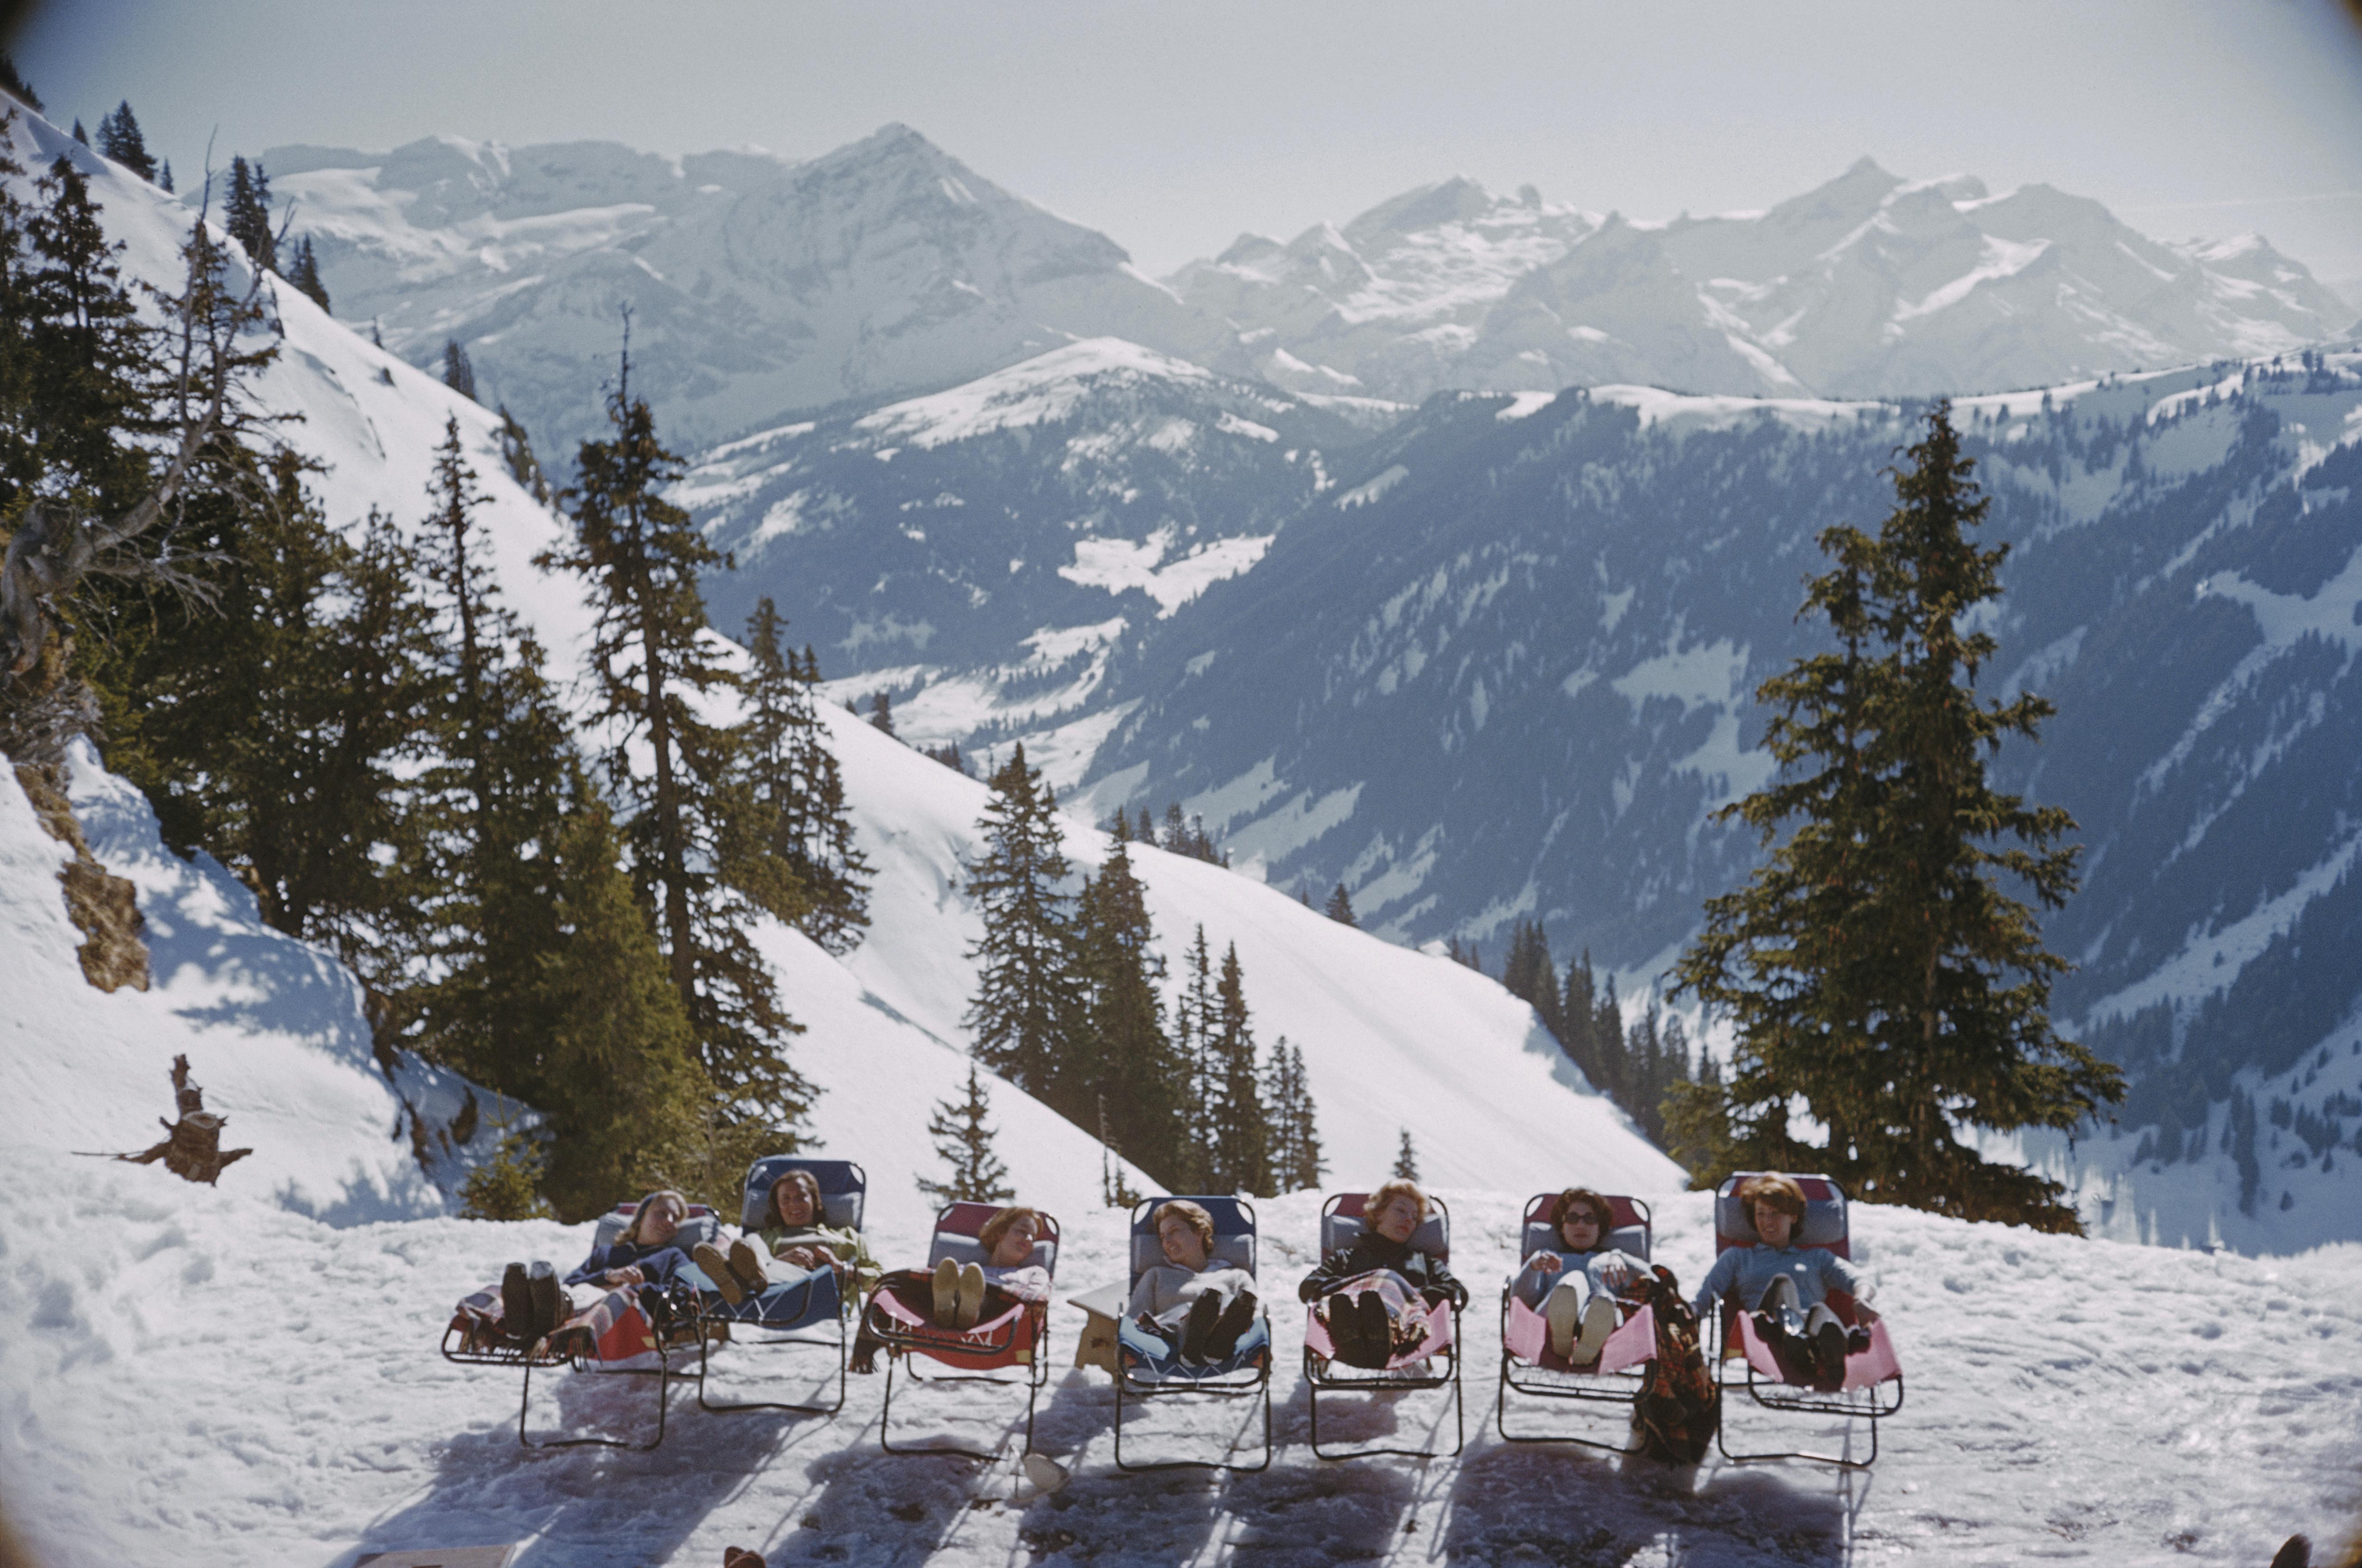 Holidaymakers in sun loungers on the slopes at at Gstaad, Switzerland, March 1961. 

Slim Aarons
Lounging in Gstaad
Chromogenic Lambda print
Printed Later
Slim Aarons Estate Edition
Complimentary dealer shipping to your framer, worldwide.
Stamped